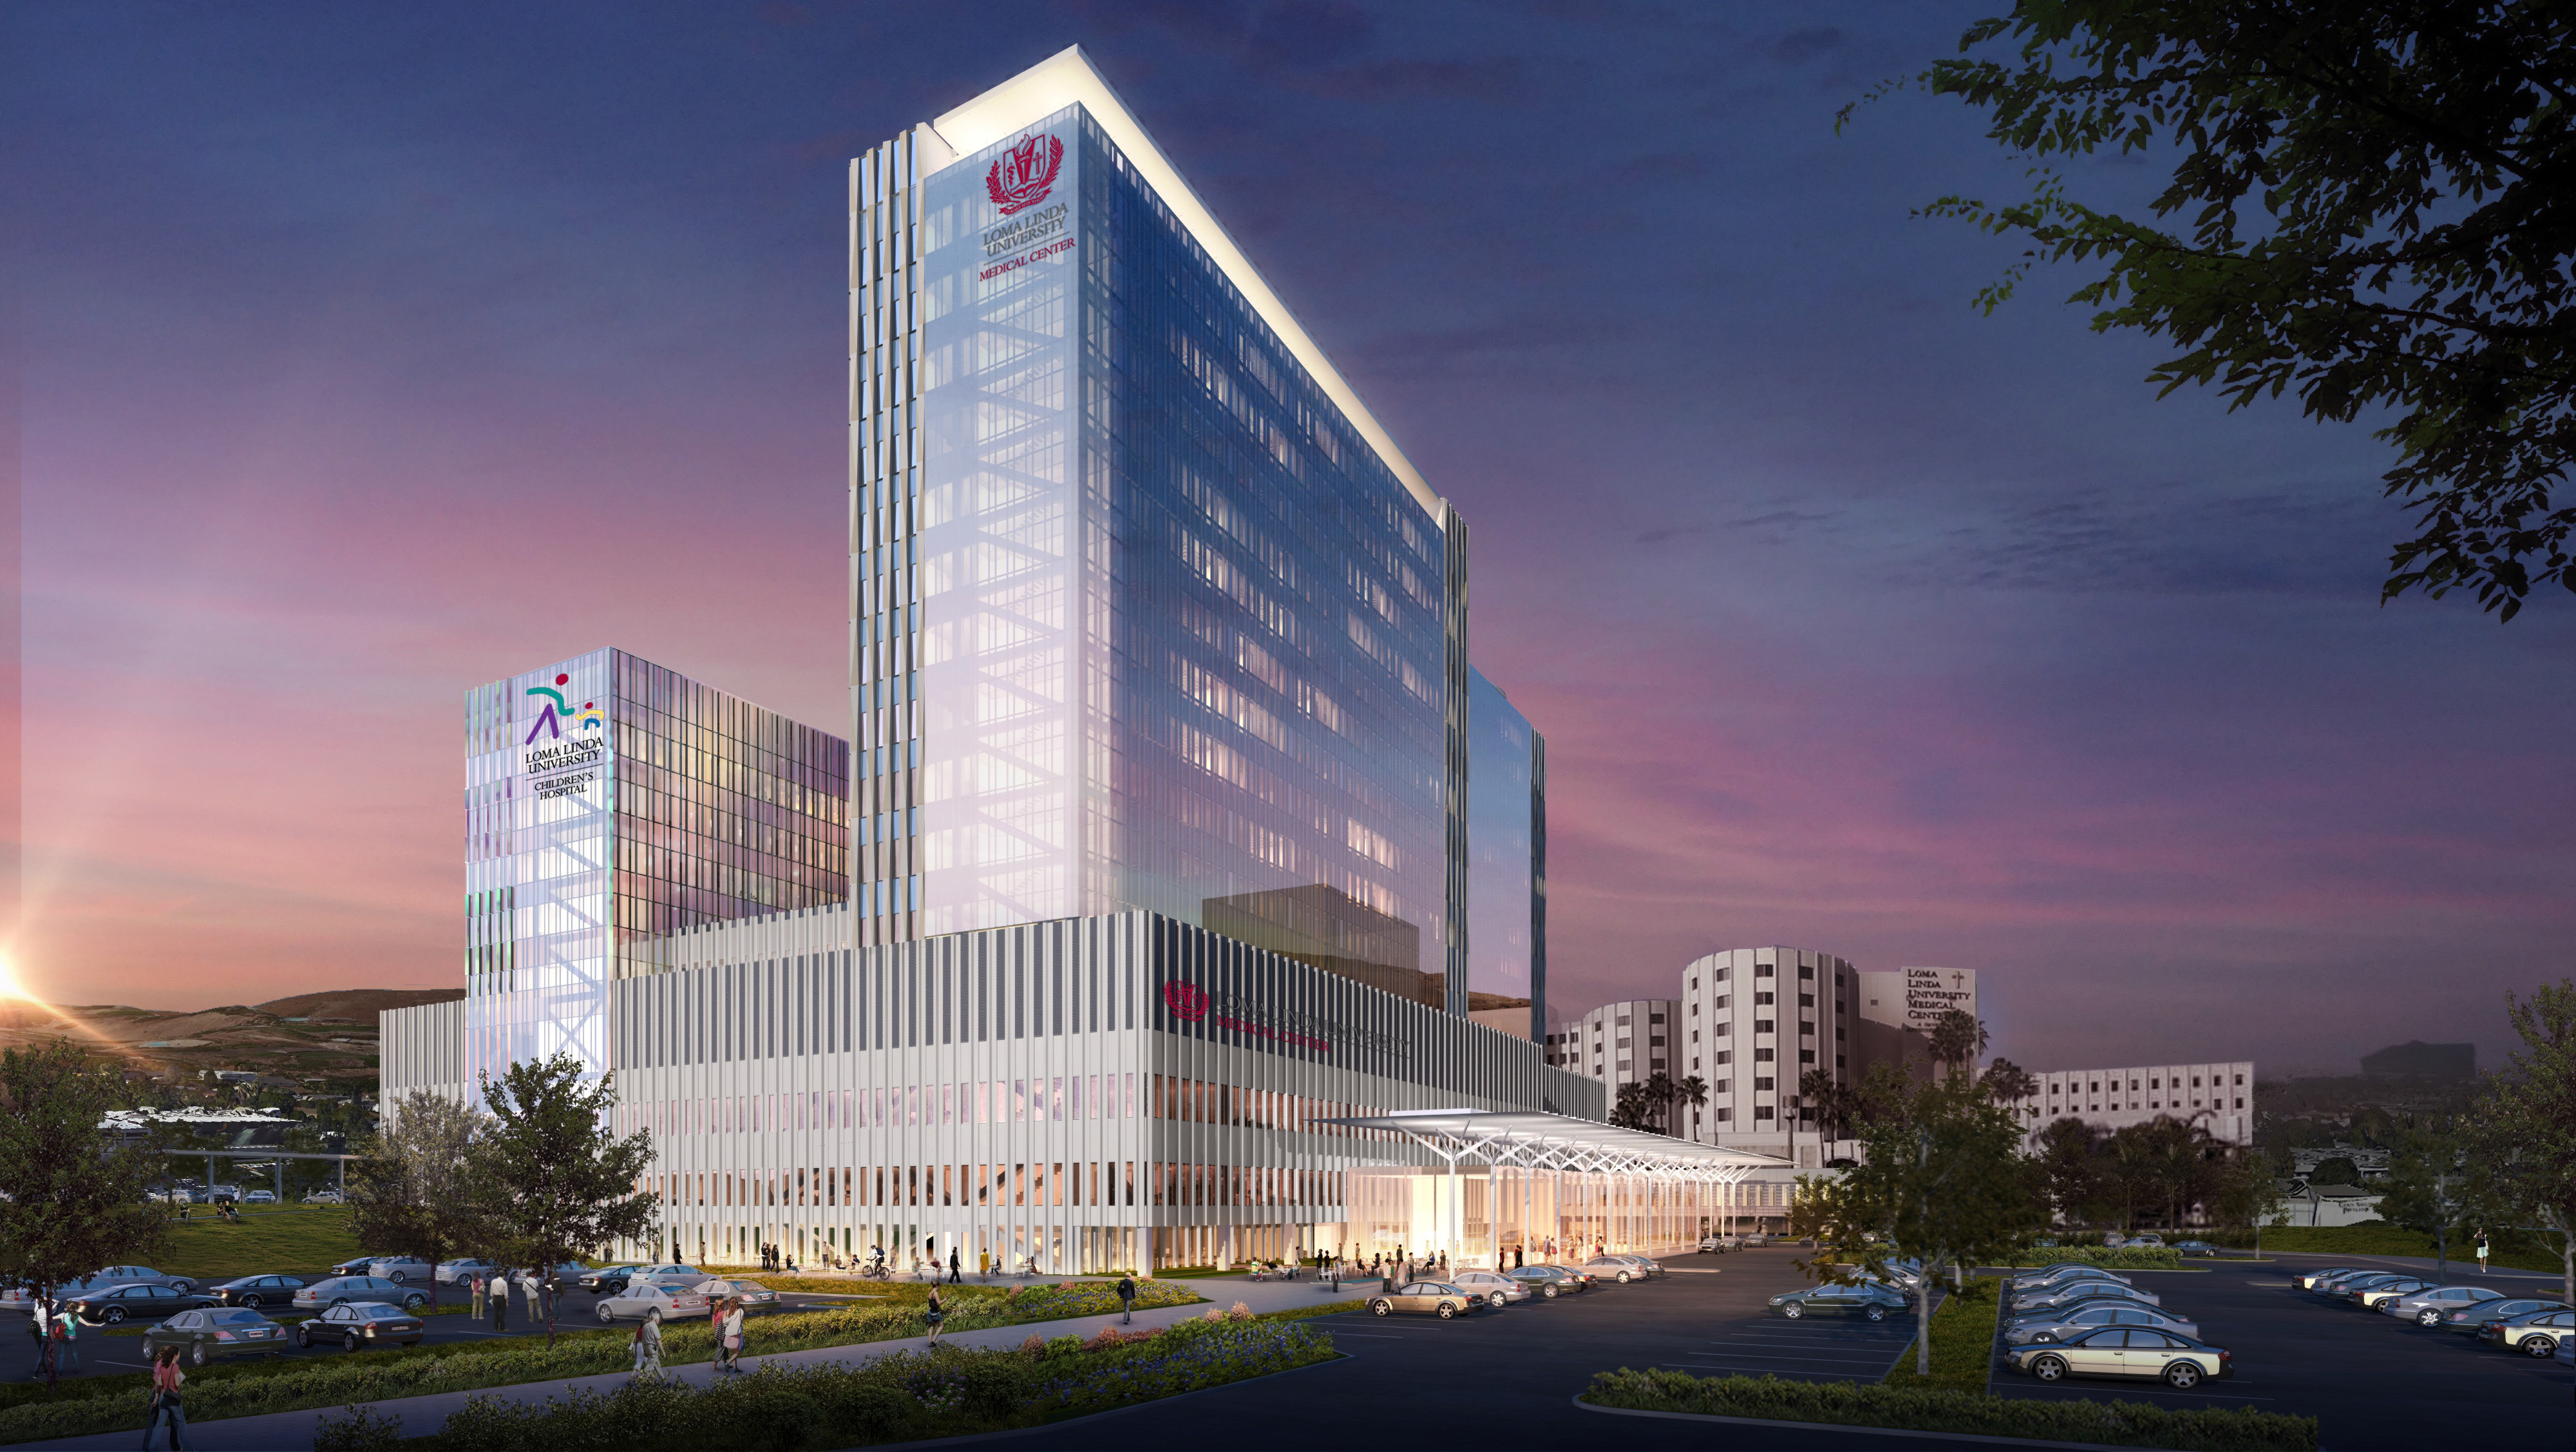 Renderings finalized for new hospital towers :: News of the Week